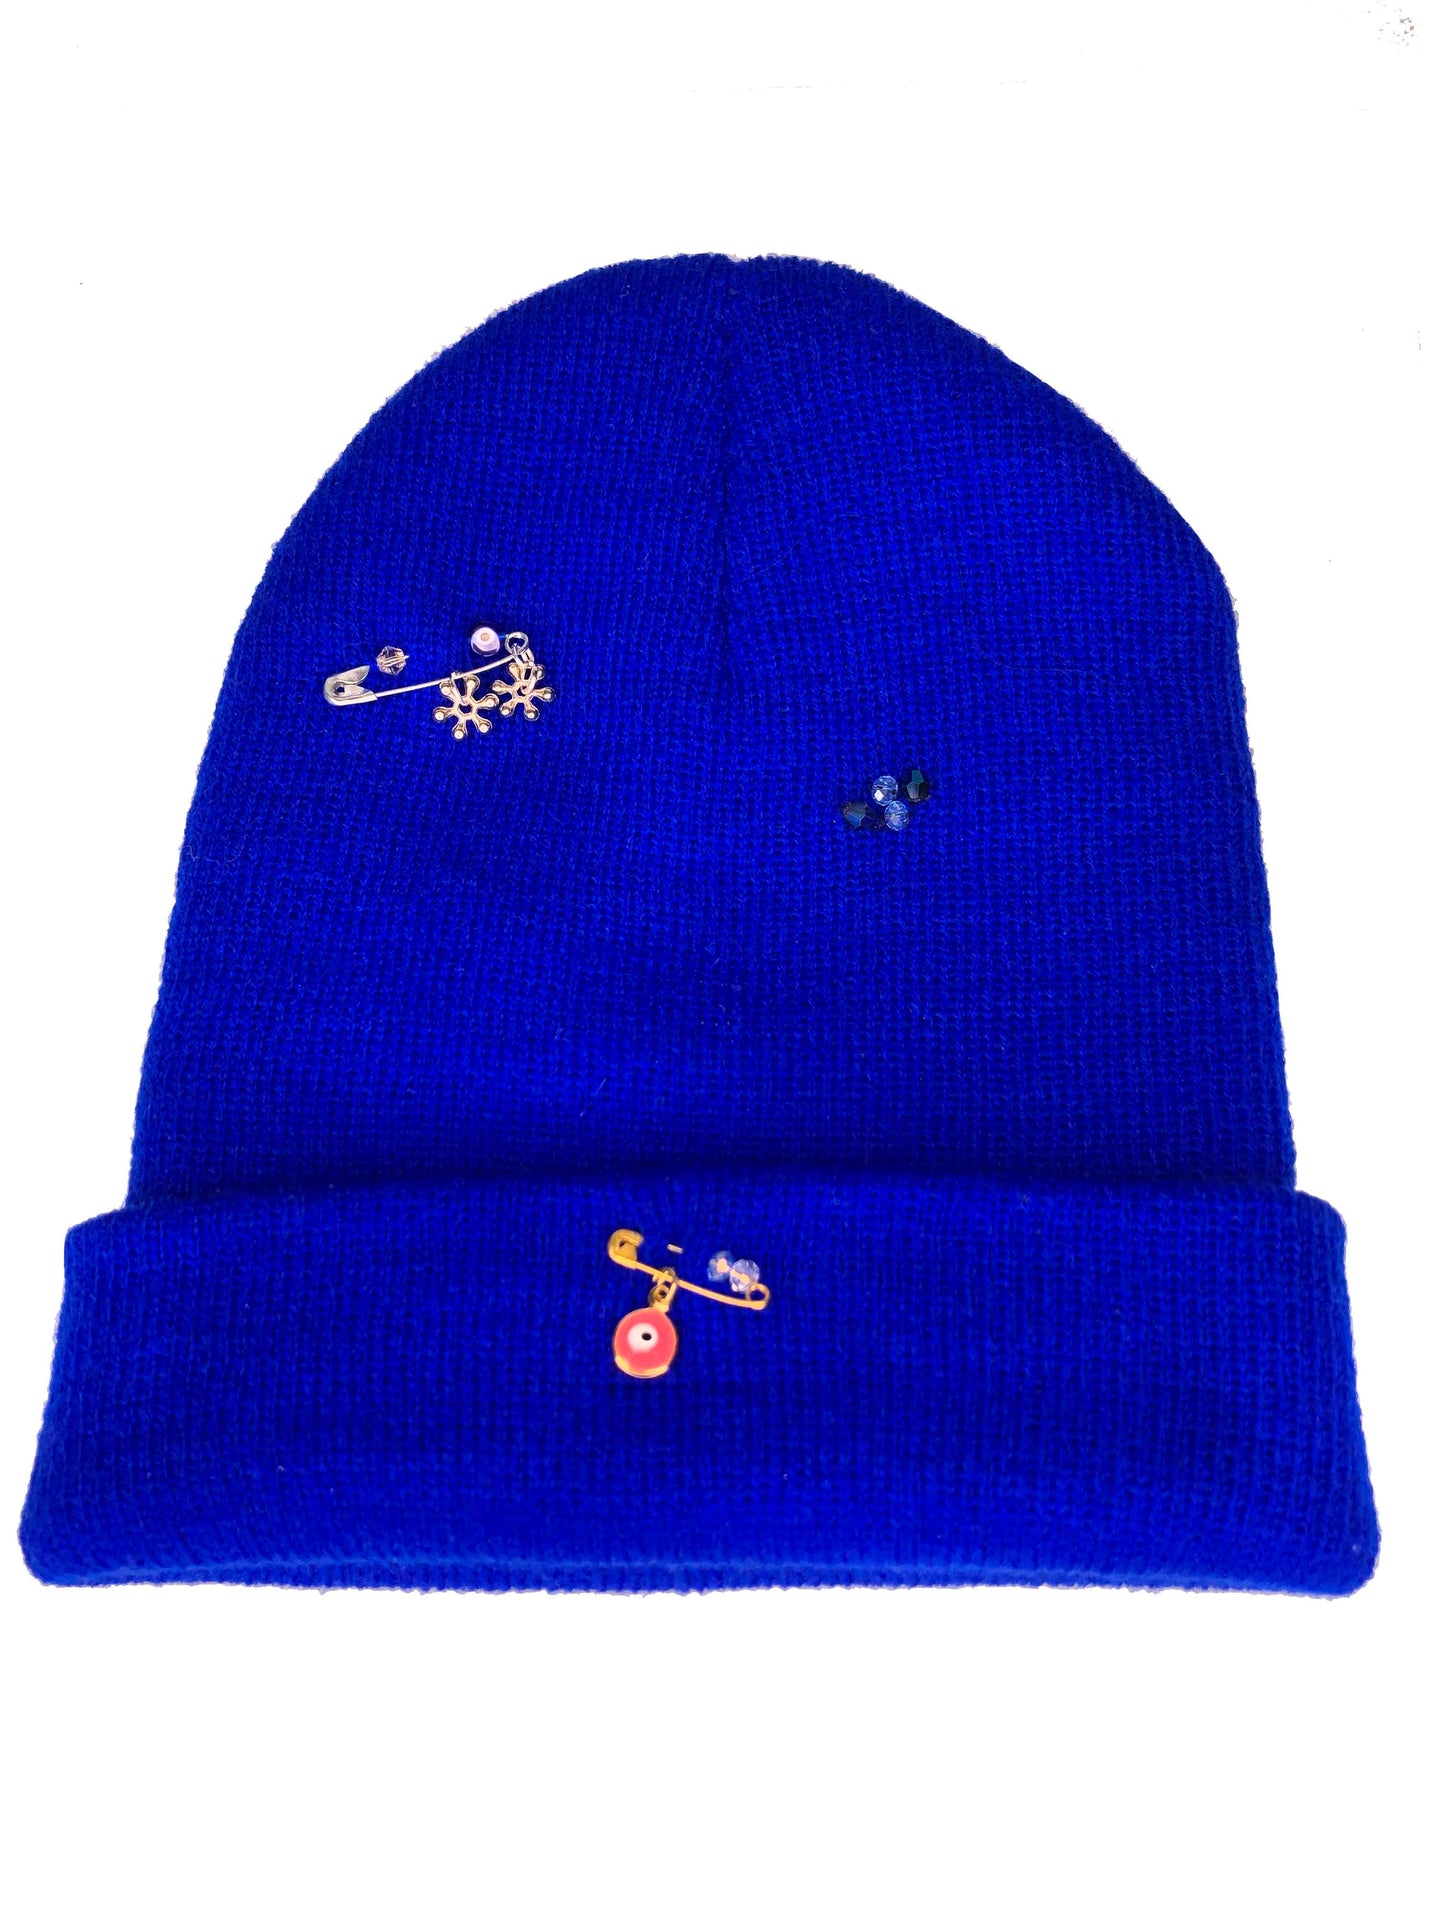 A blue wool knit beanie decorated with safety pins, flower and evil eye charms, and crystal beads.